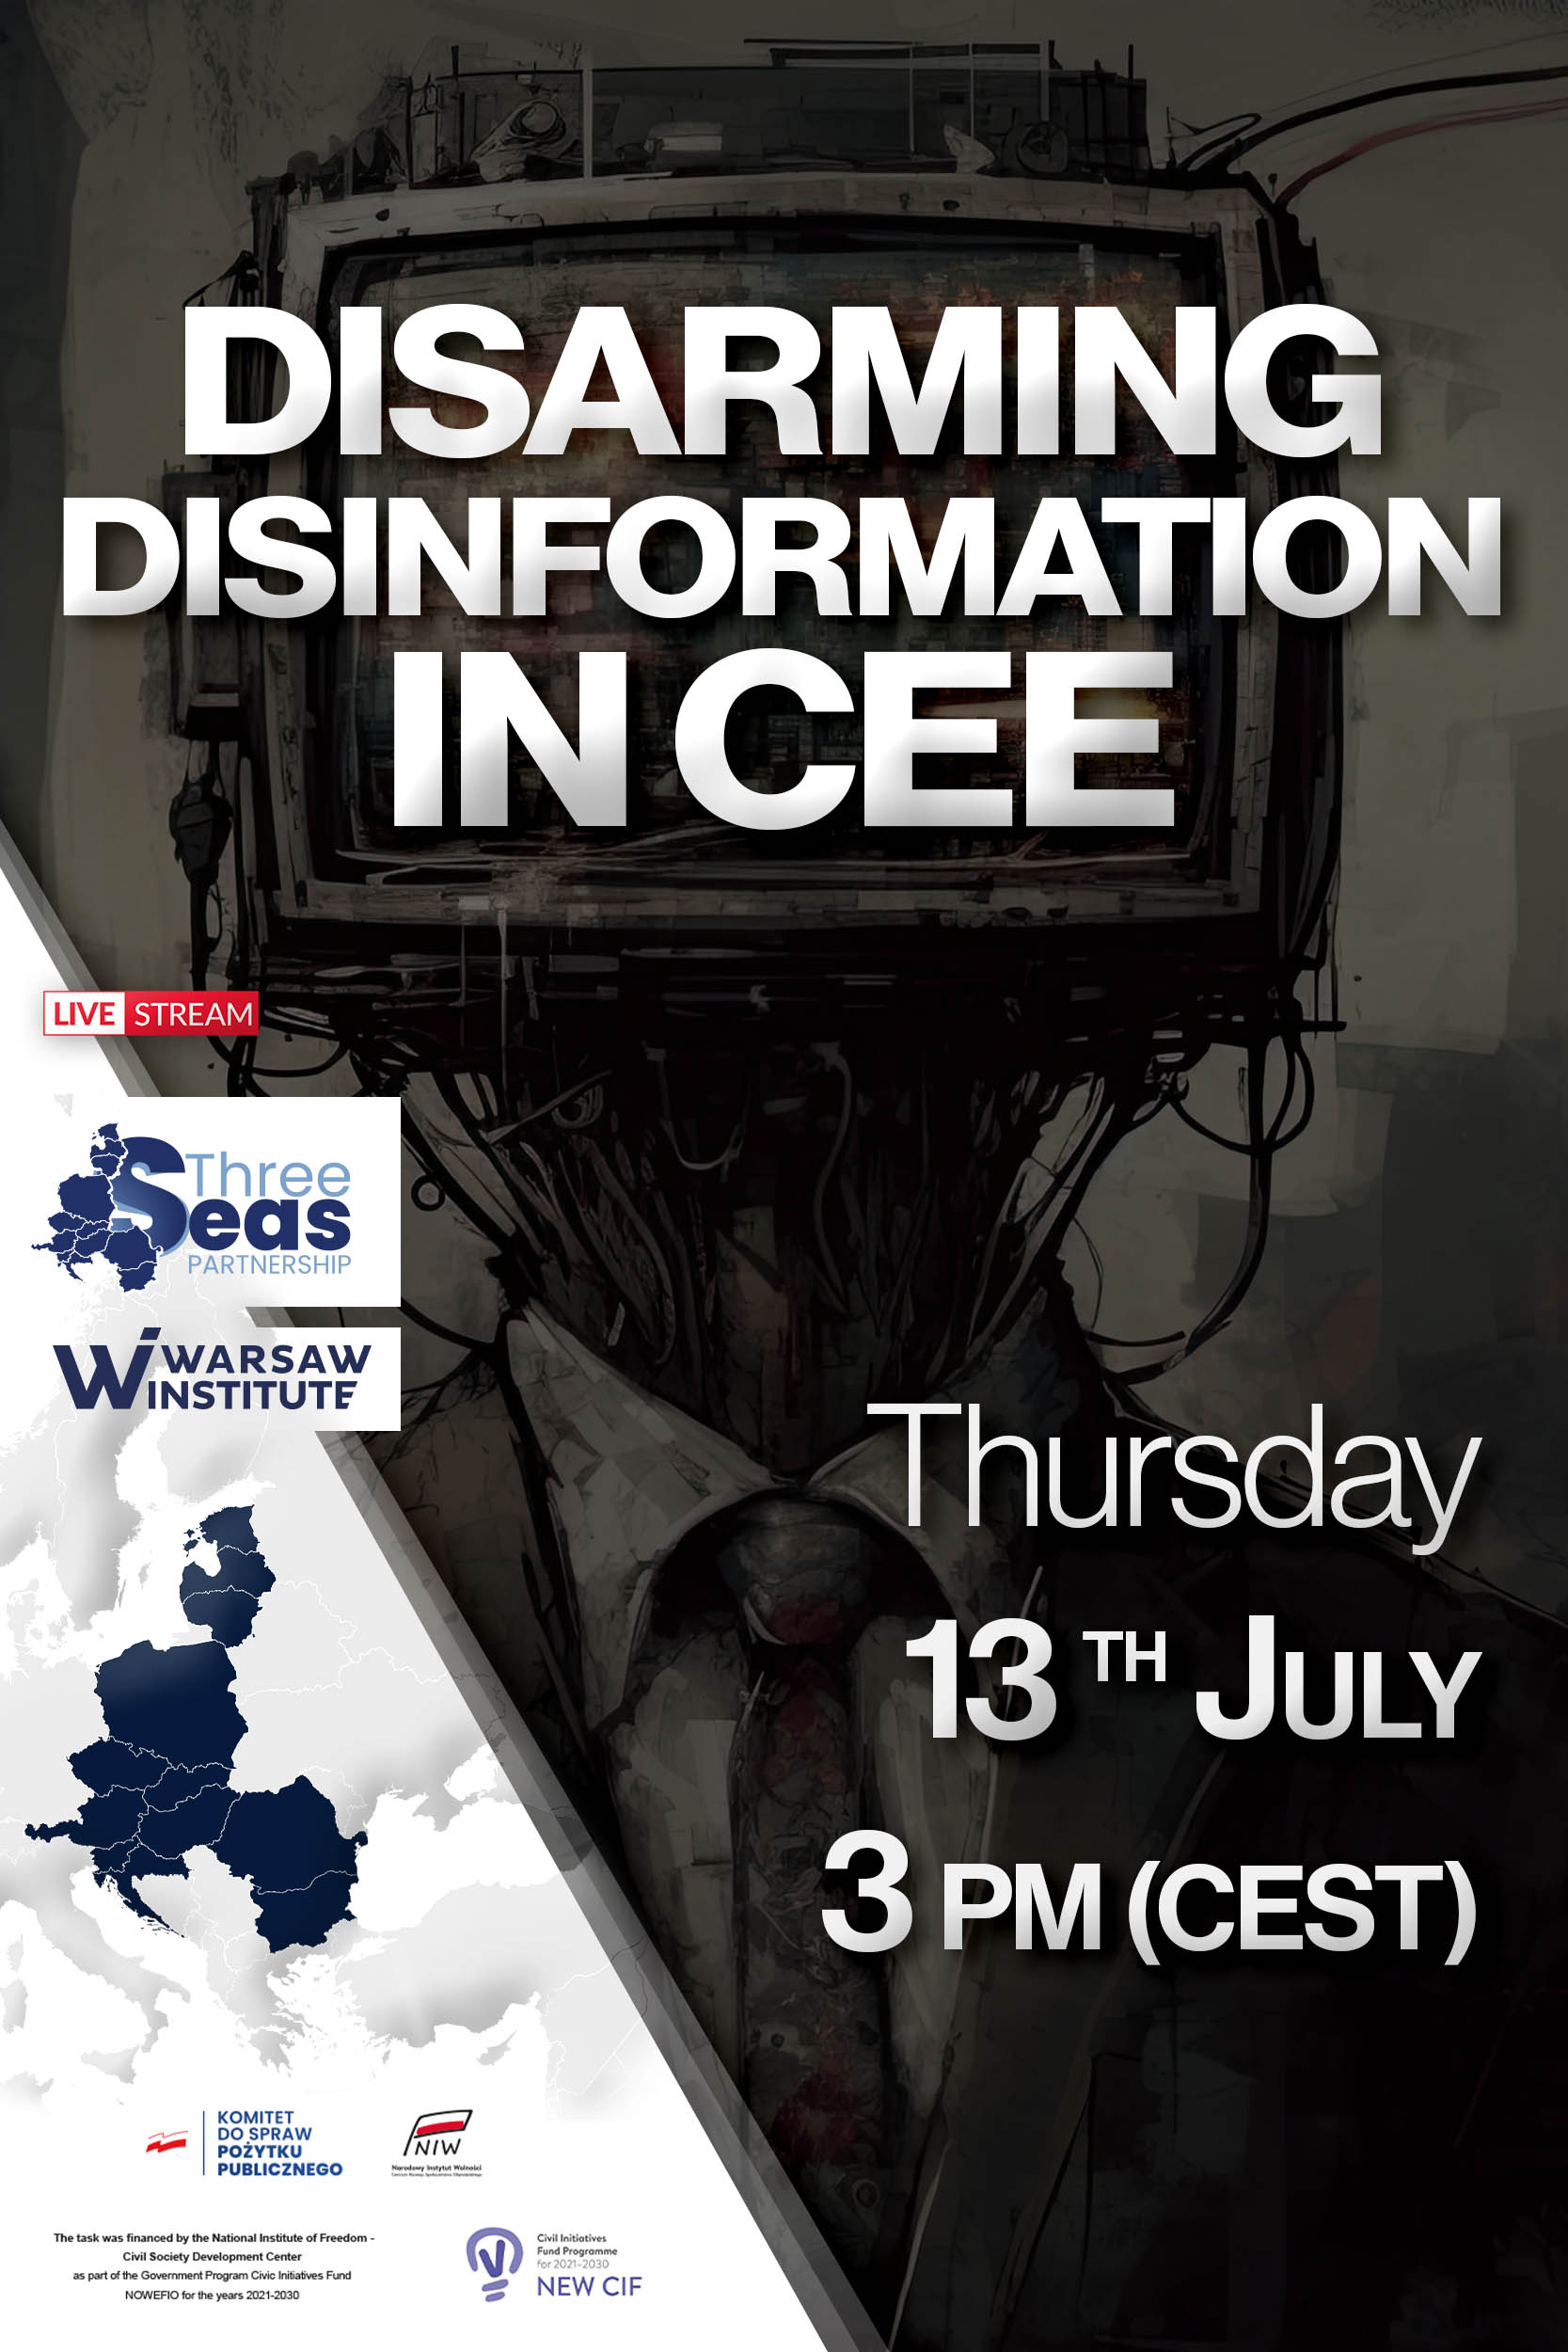 Disarming disinformation in CEE